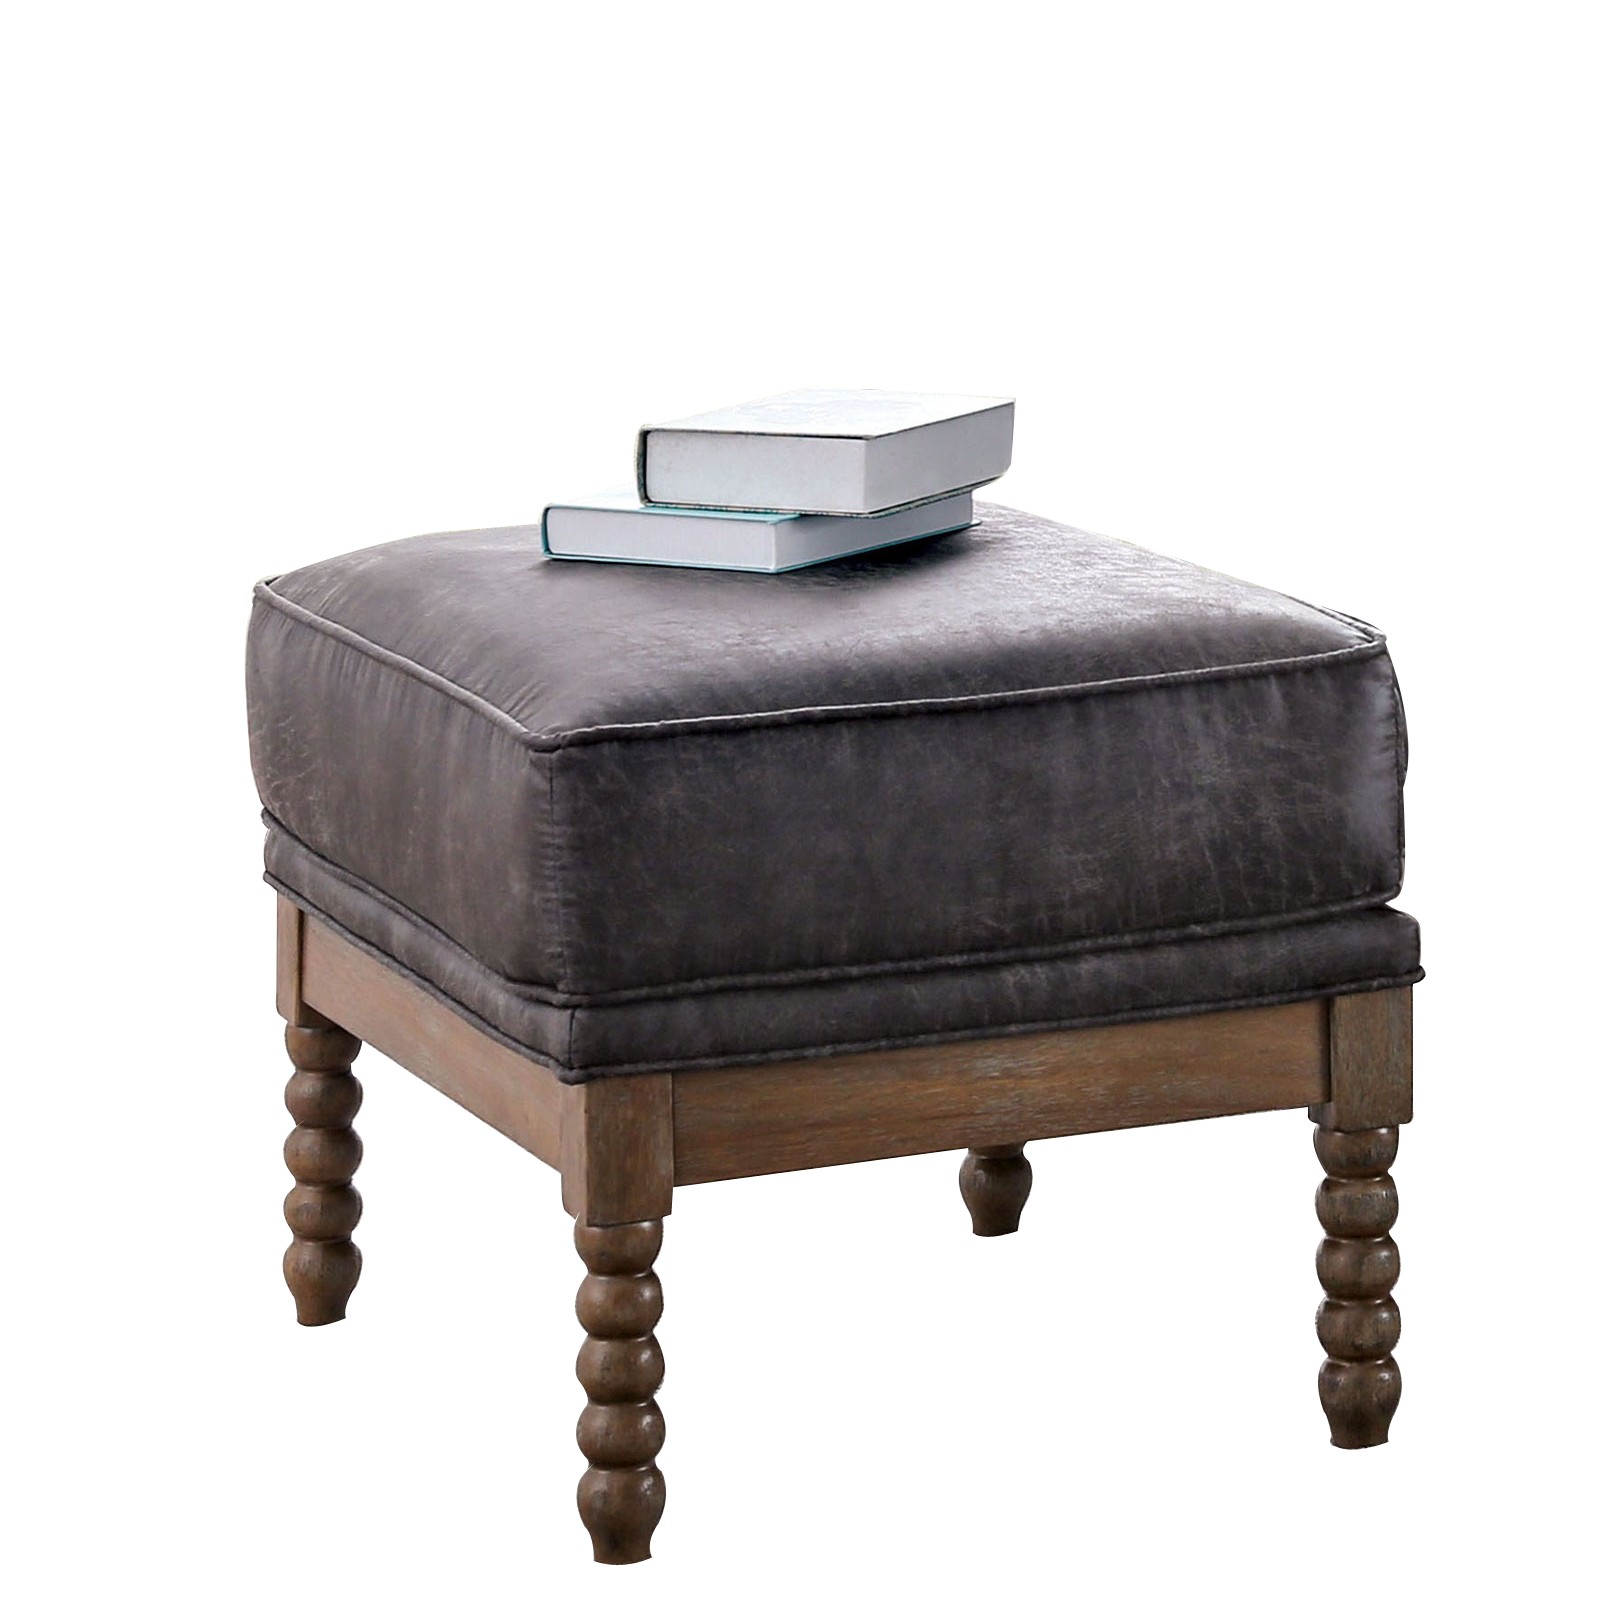 Traditional leatherette wooden ottoman with beaded legs